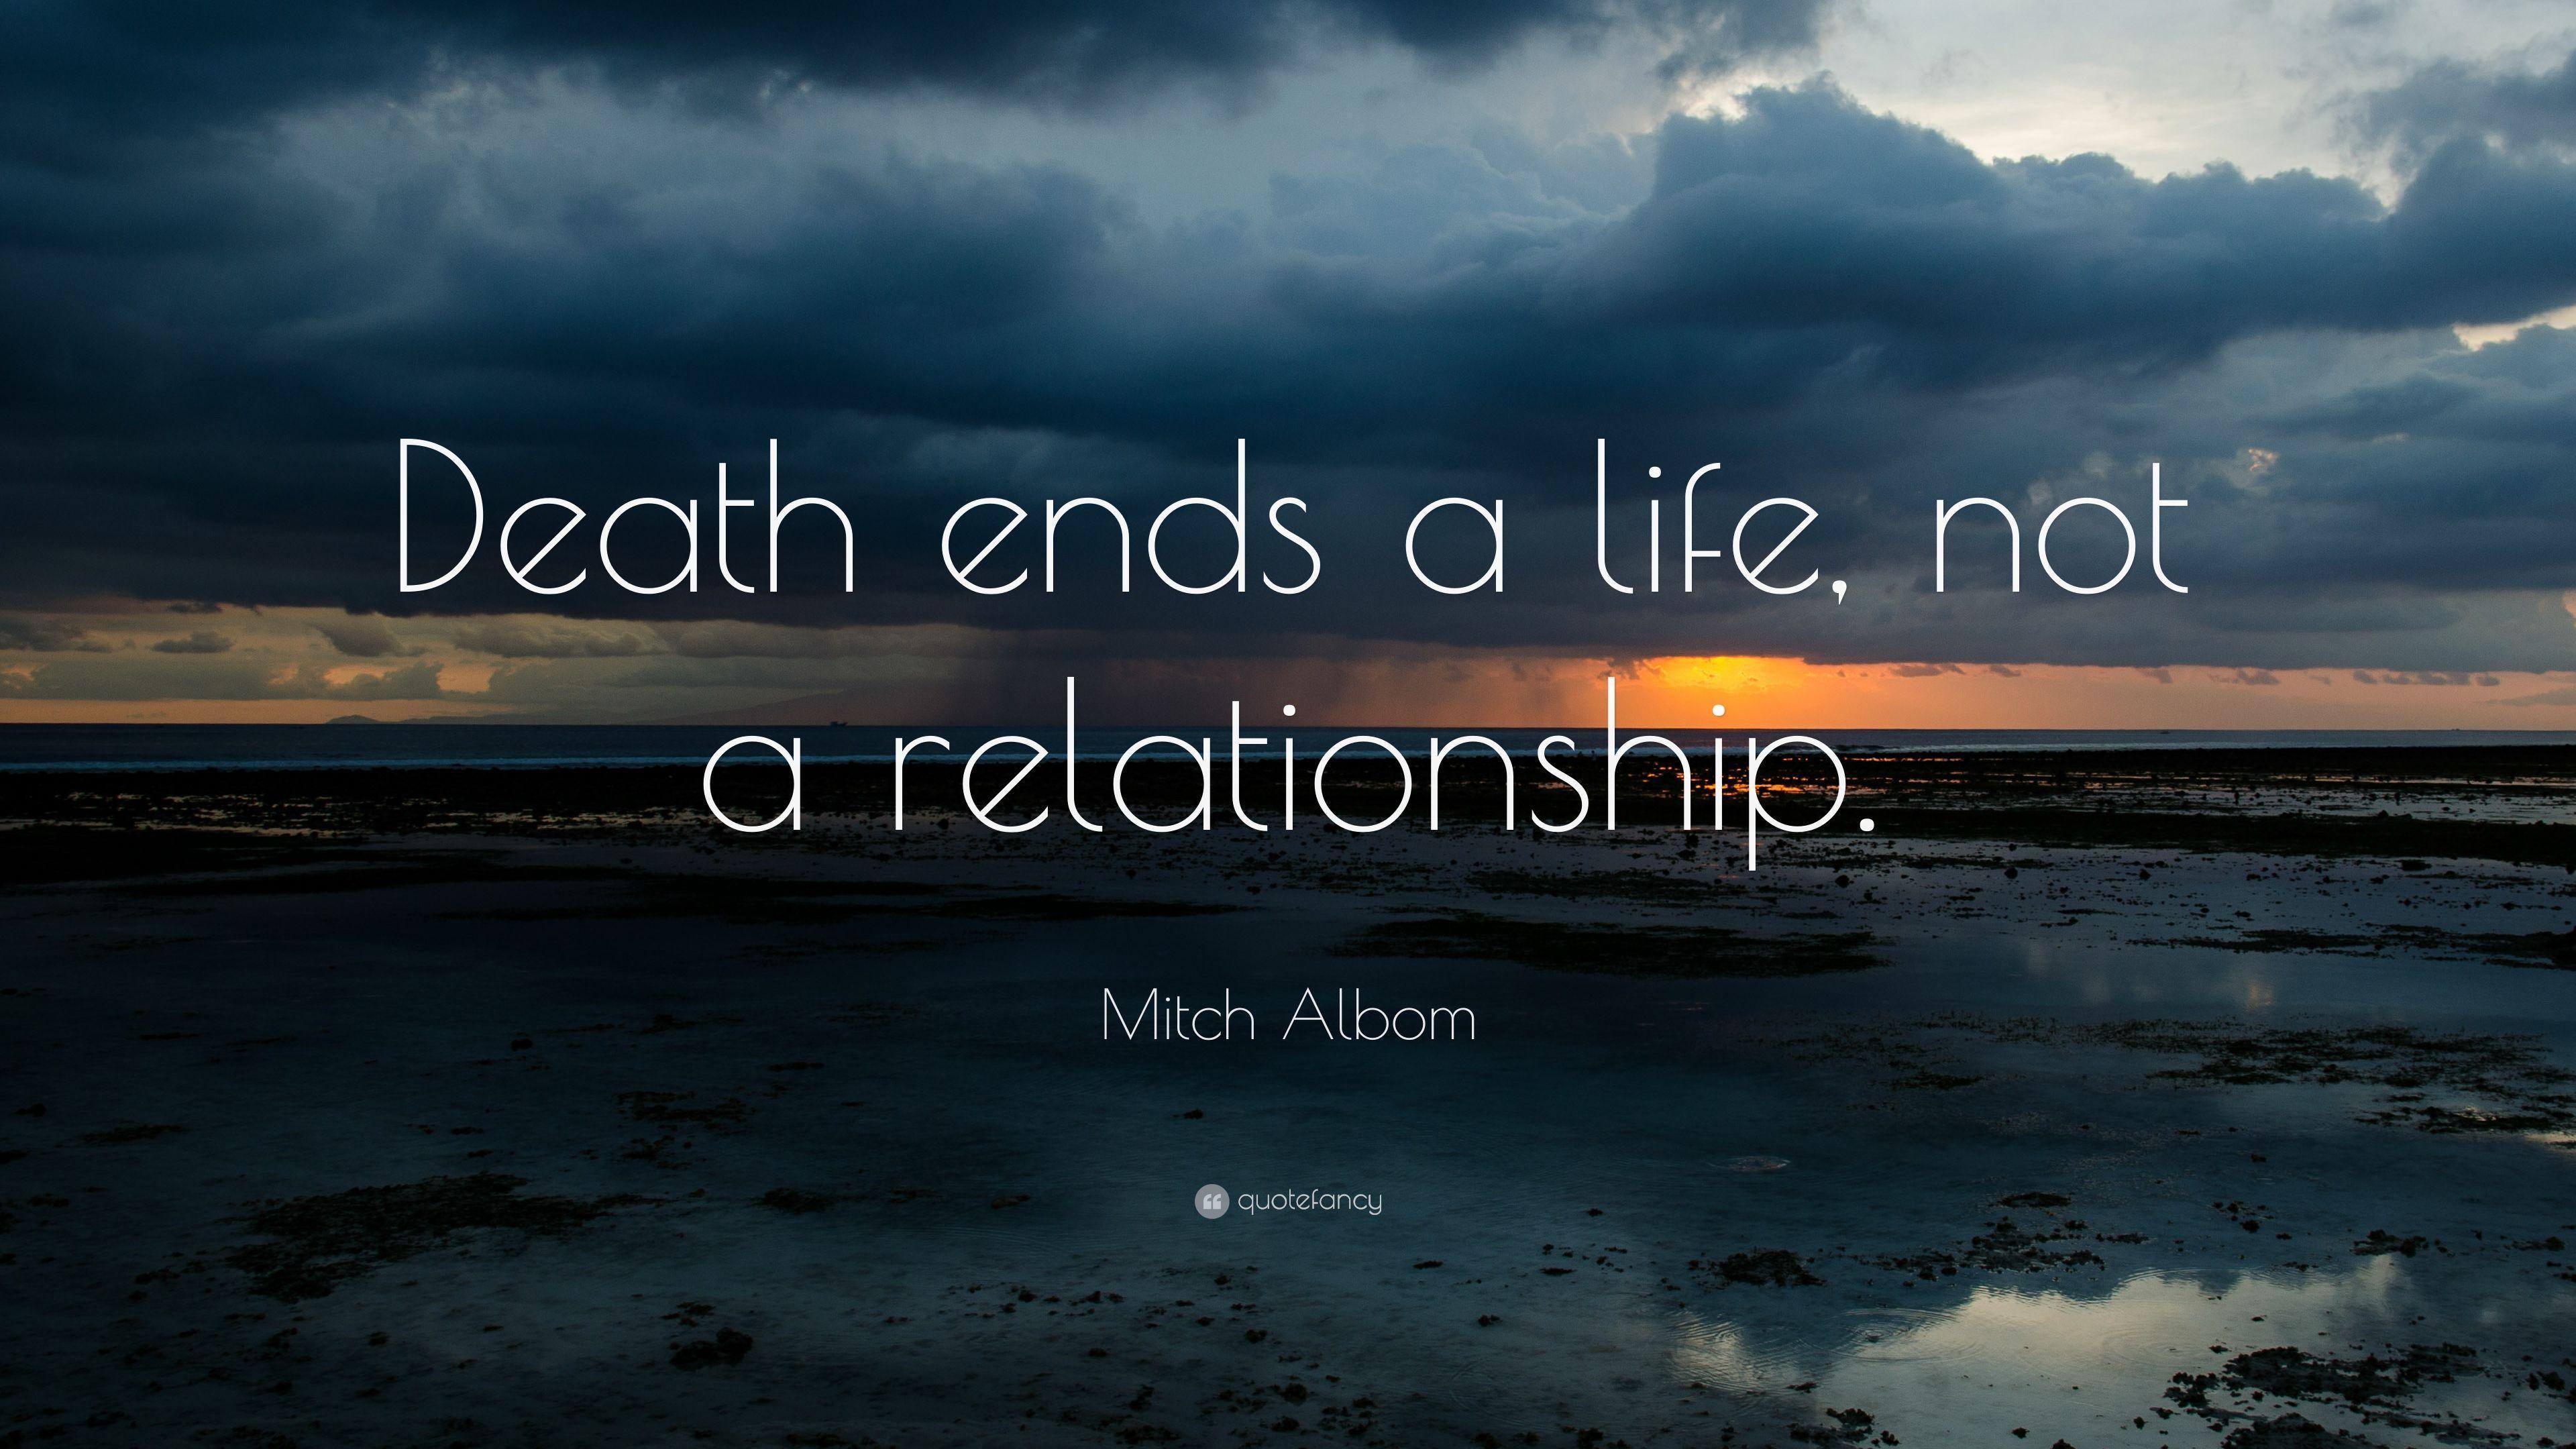 Mitch Albom Quote: “Death ends a life, not a relationship.” 25